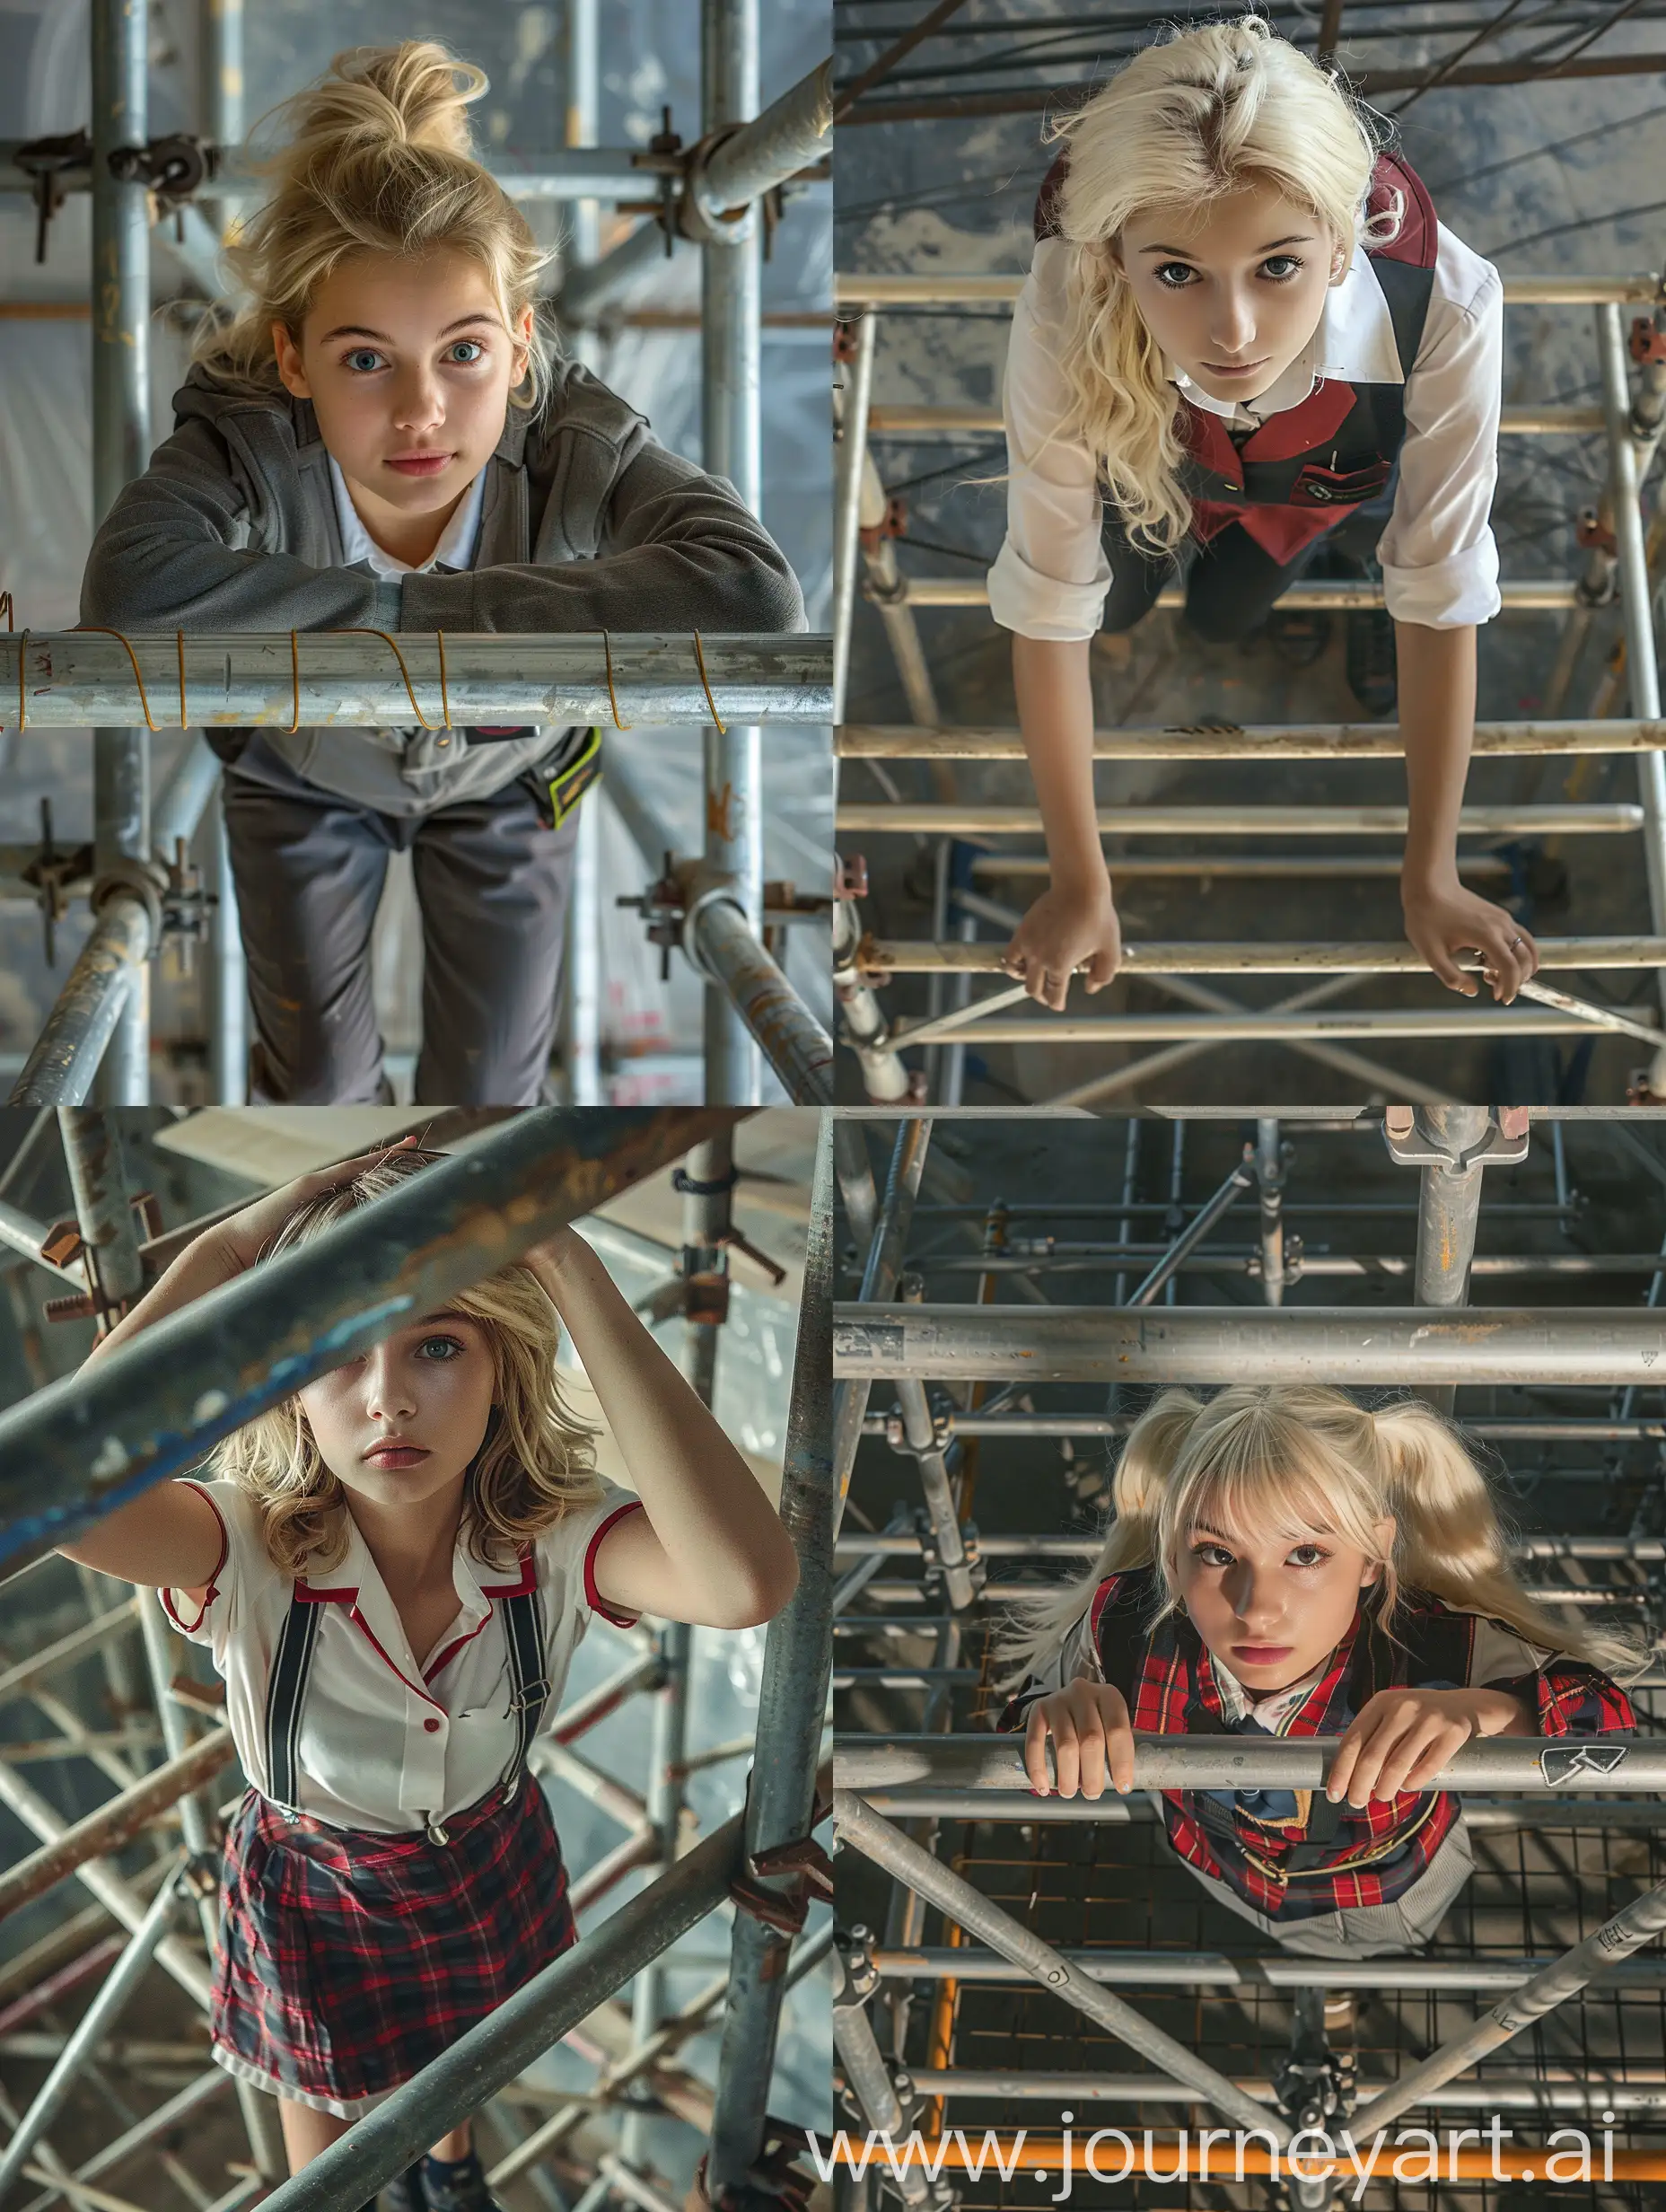 beauty girl, blonde hair, 19 years old, school uniform, is working on a steel scaffolding under construction, down view